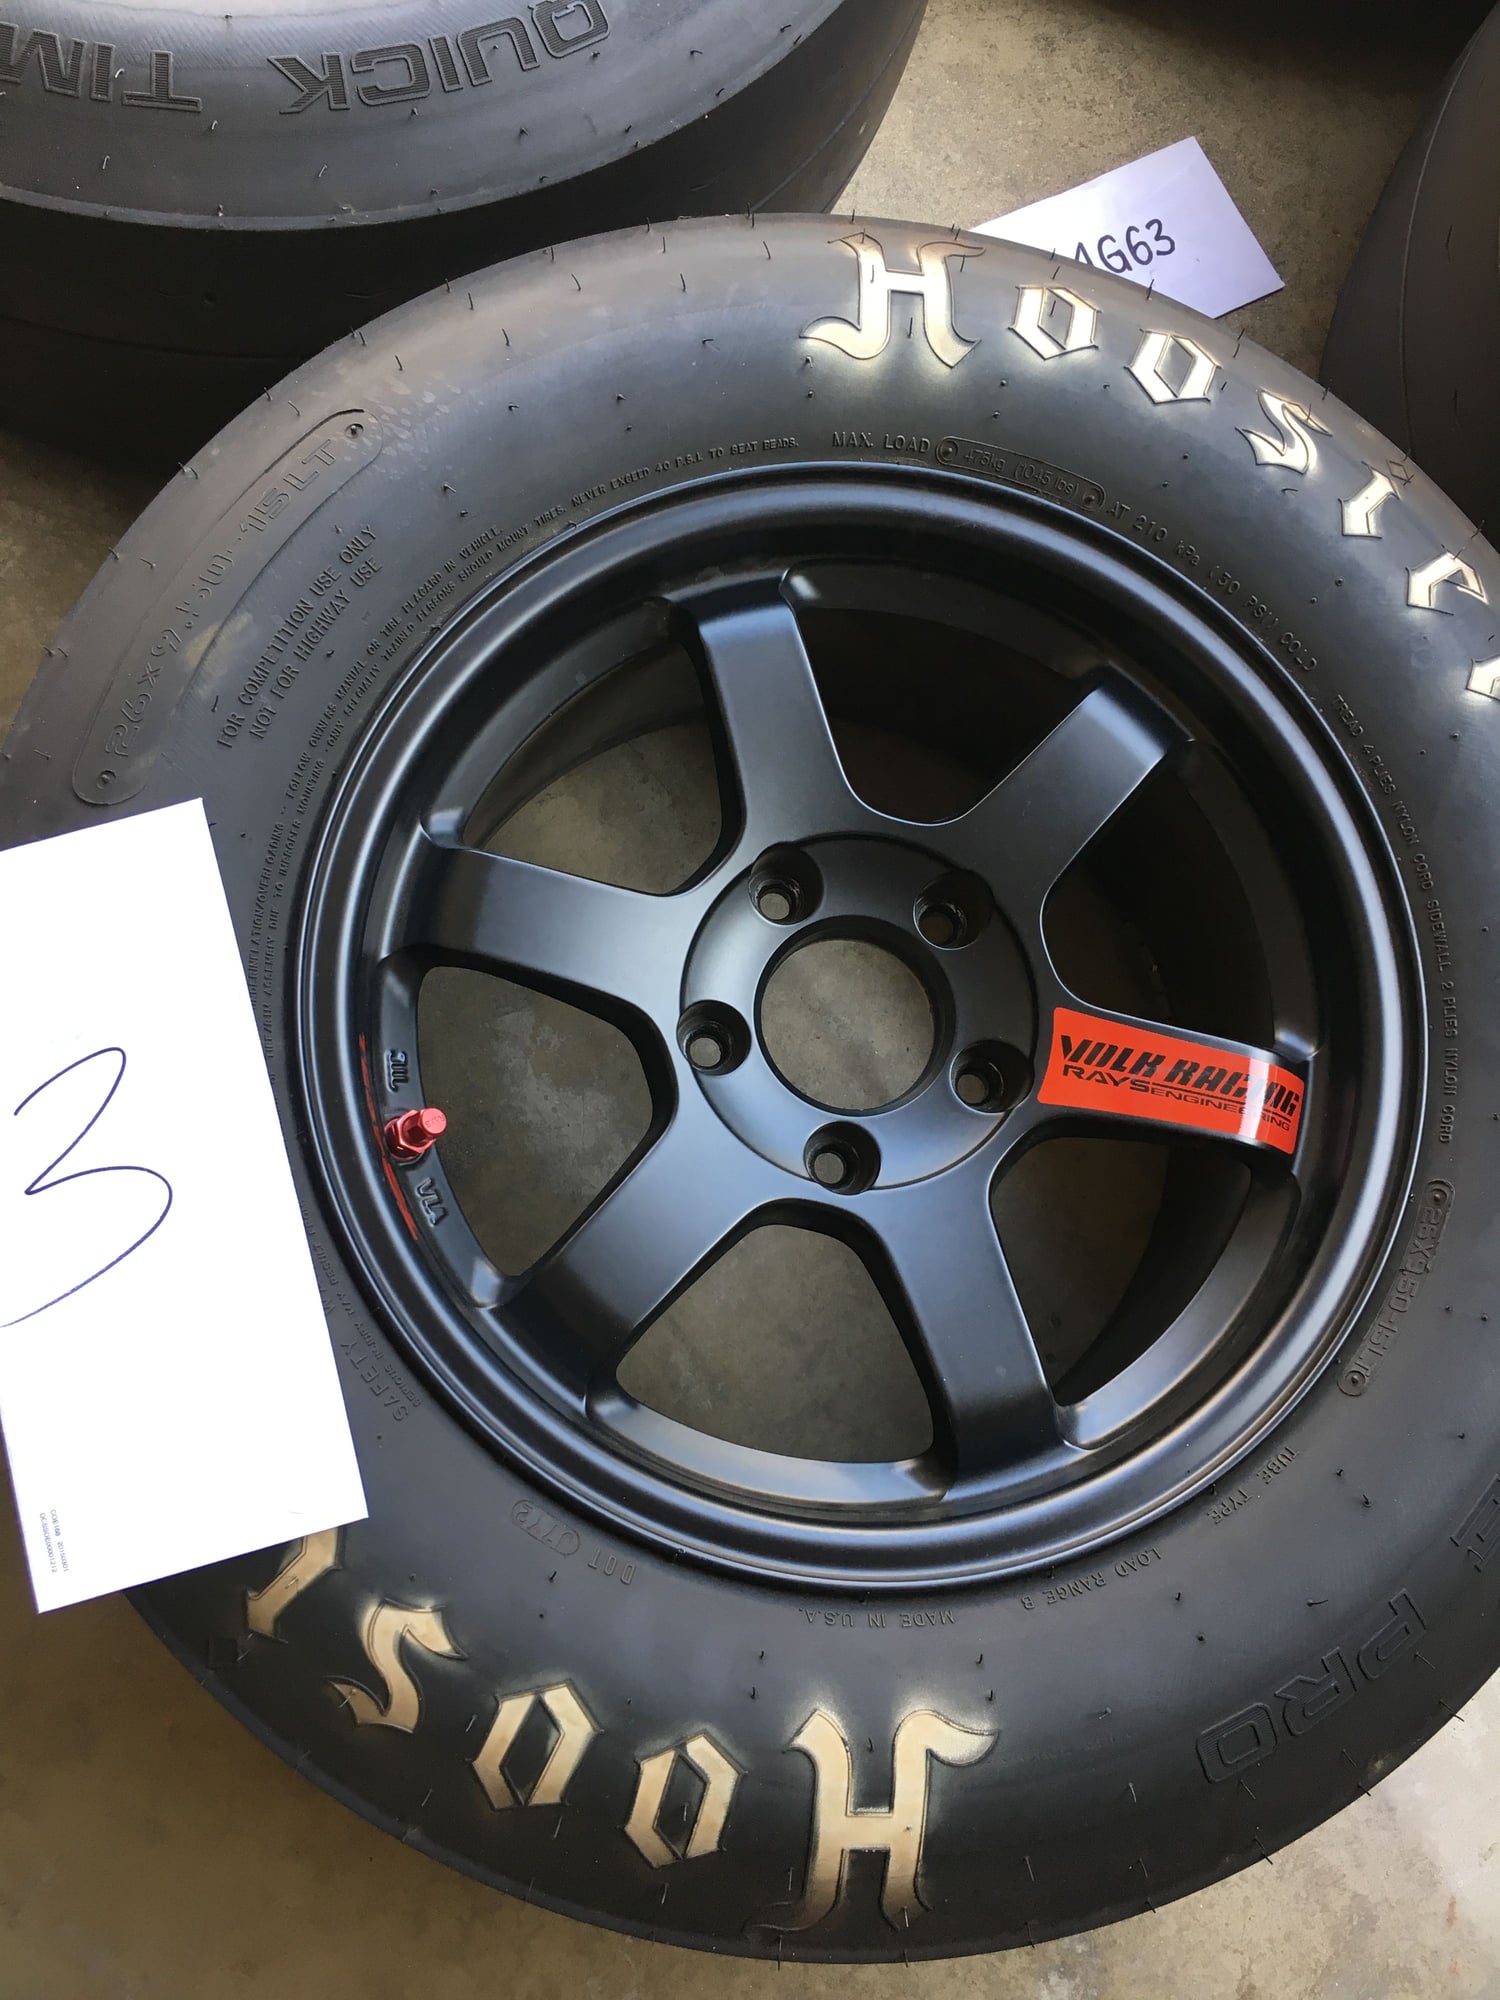 Wheels and Tires/Axles - FS: Volk TE37SL 15" x 8" 32mm offset with Hoosier QTPs - Used - 2003 to 2006 Mitsubishi Lancer Evolution - Hacienda Heights, CA 91745, United States